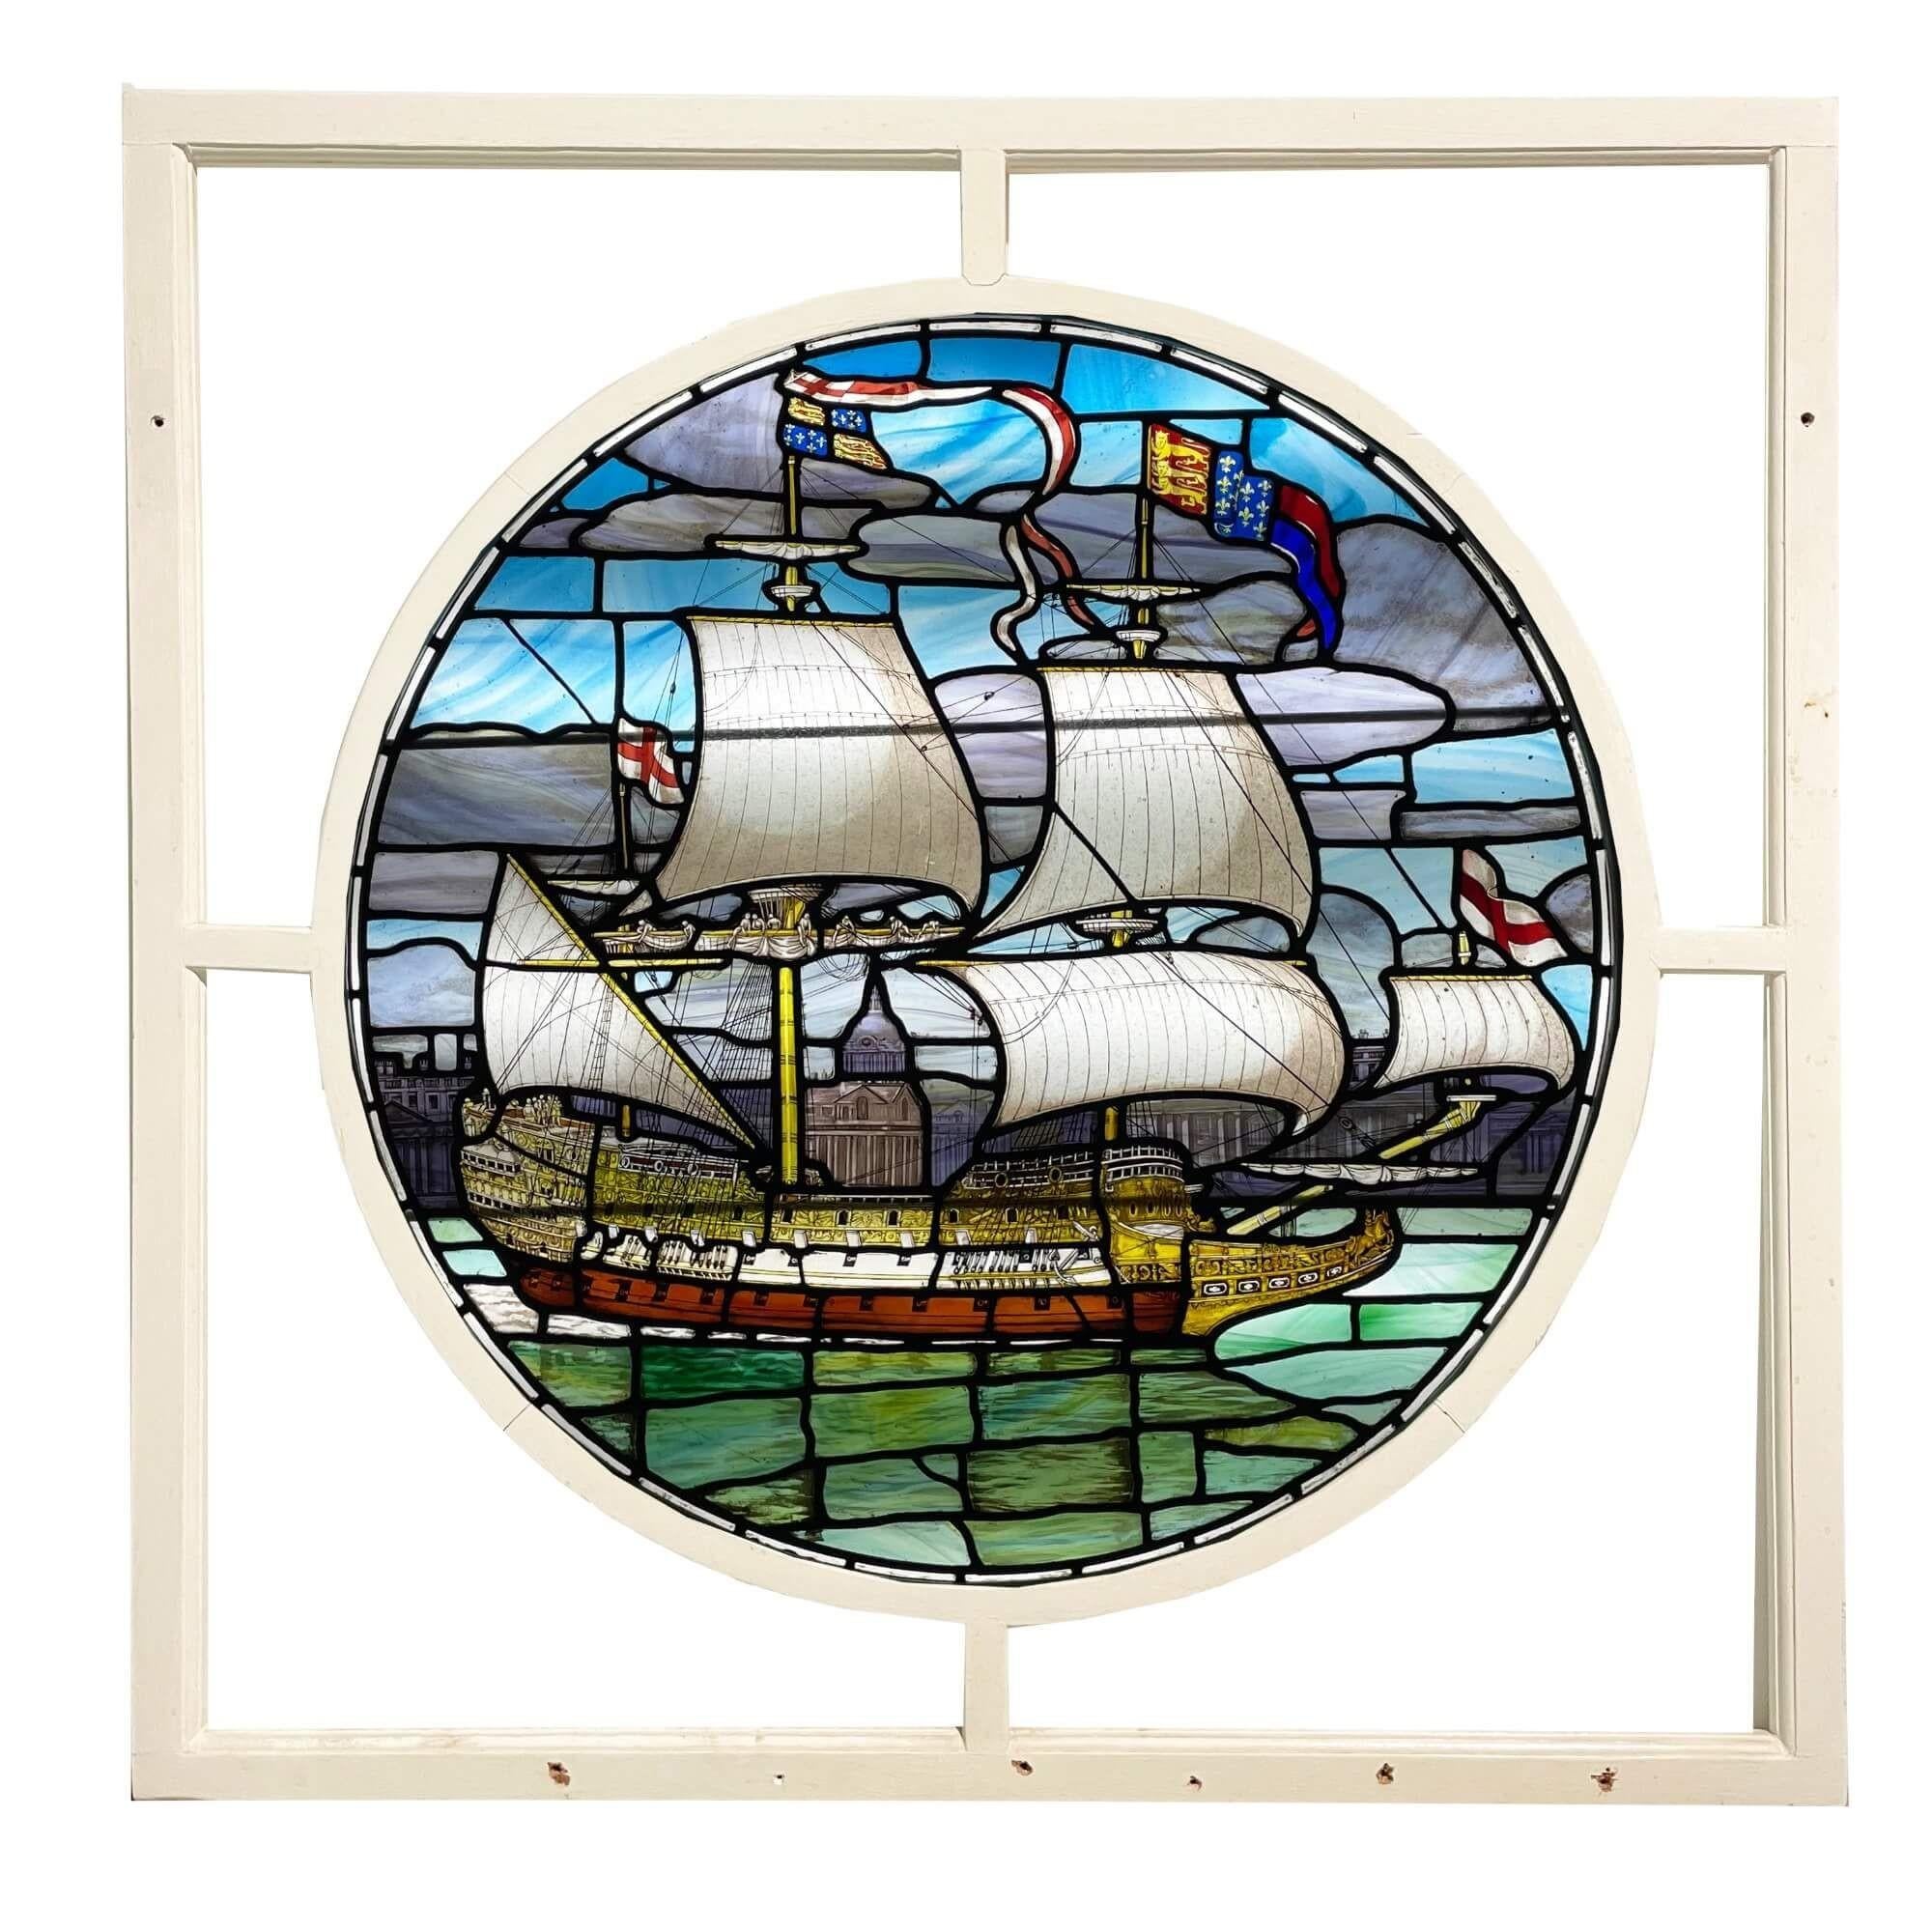 A spectacular large antique English stained glass window depicting a grand masted sailing ship before a view of a city, likely London. Originating from the late 19th century, the stained glass details an 18th century nautical scene 100 – 150 years